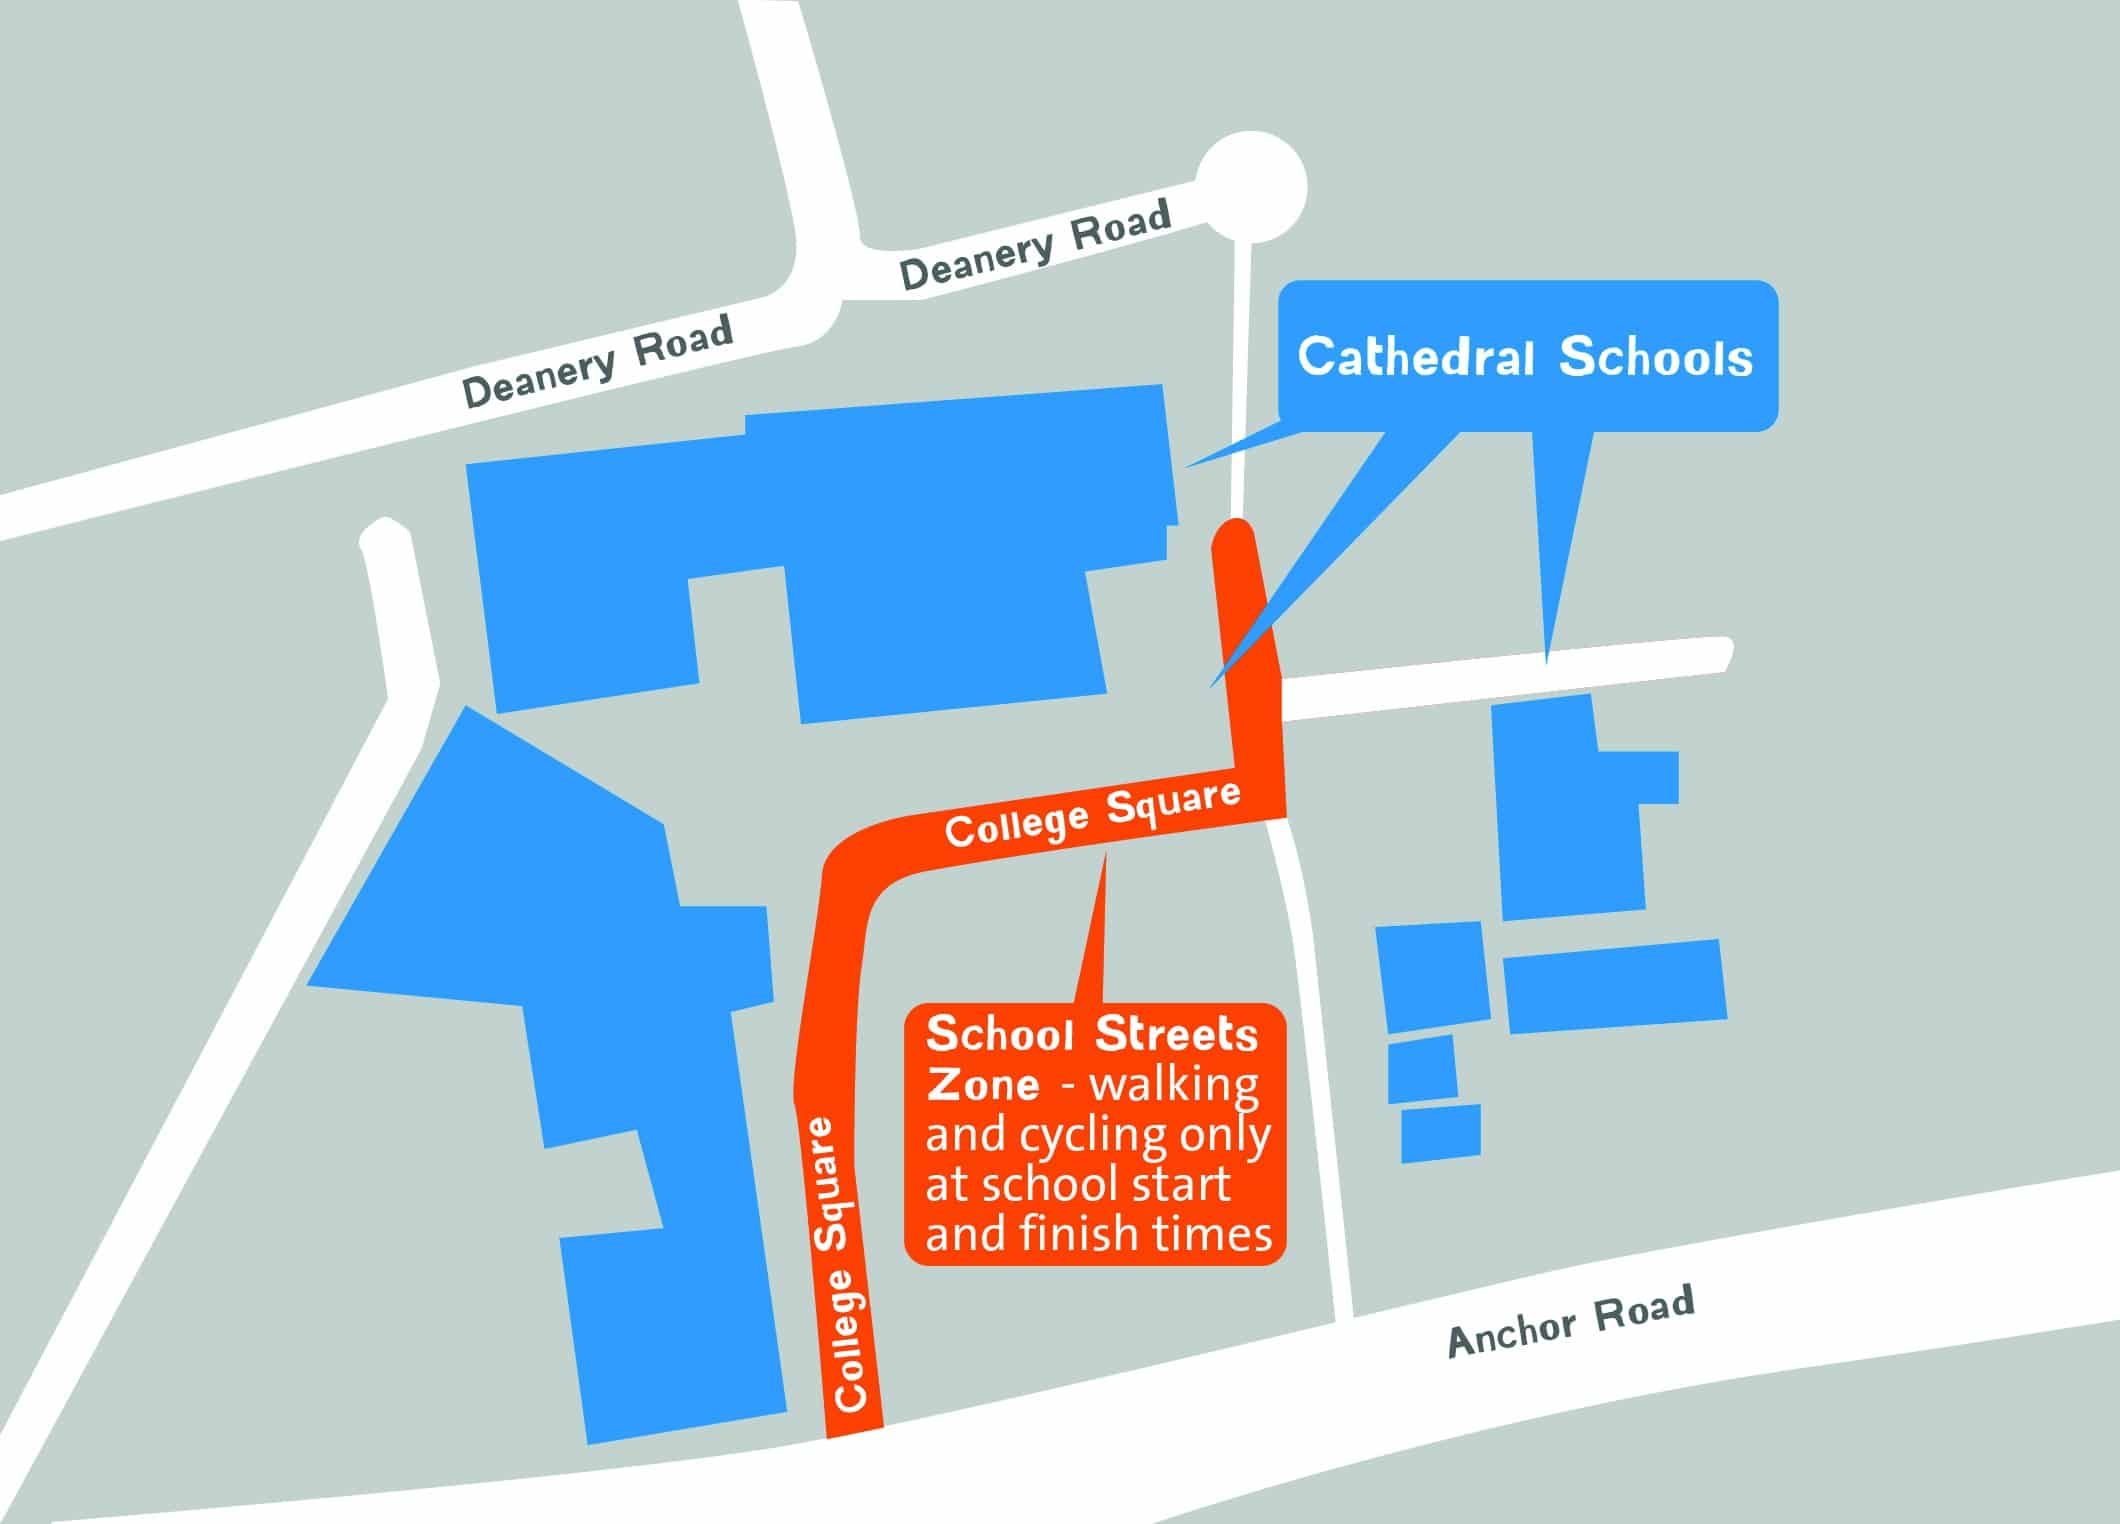 Map of Cathedral Schools and surrounding roads showing College Square as the School Streets Zone where only walking and cycling are allowed at school start and finish times.